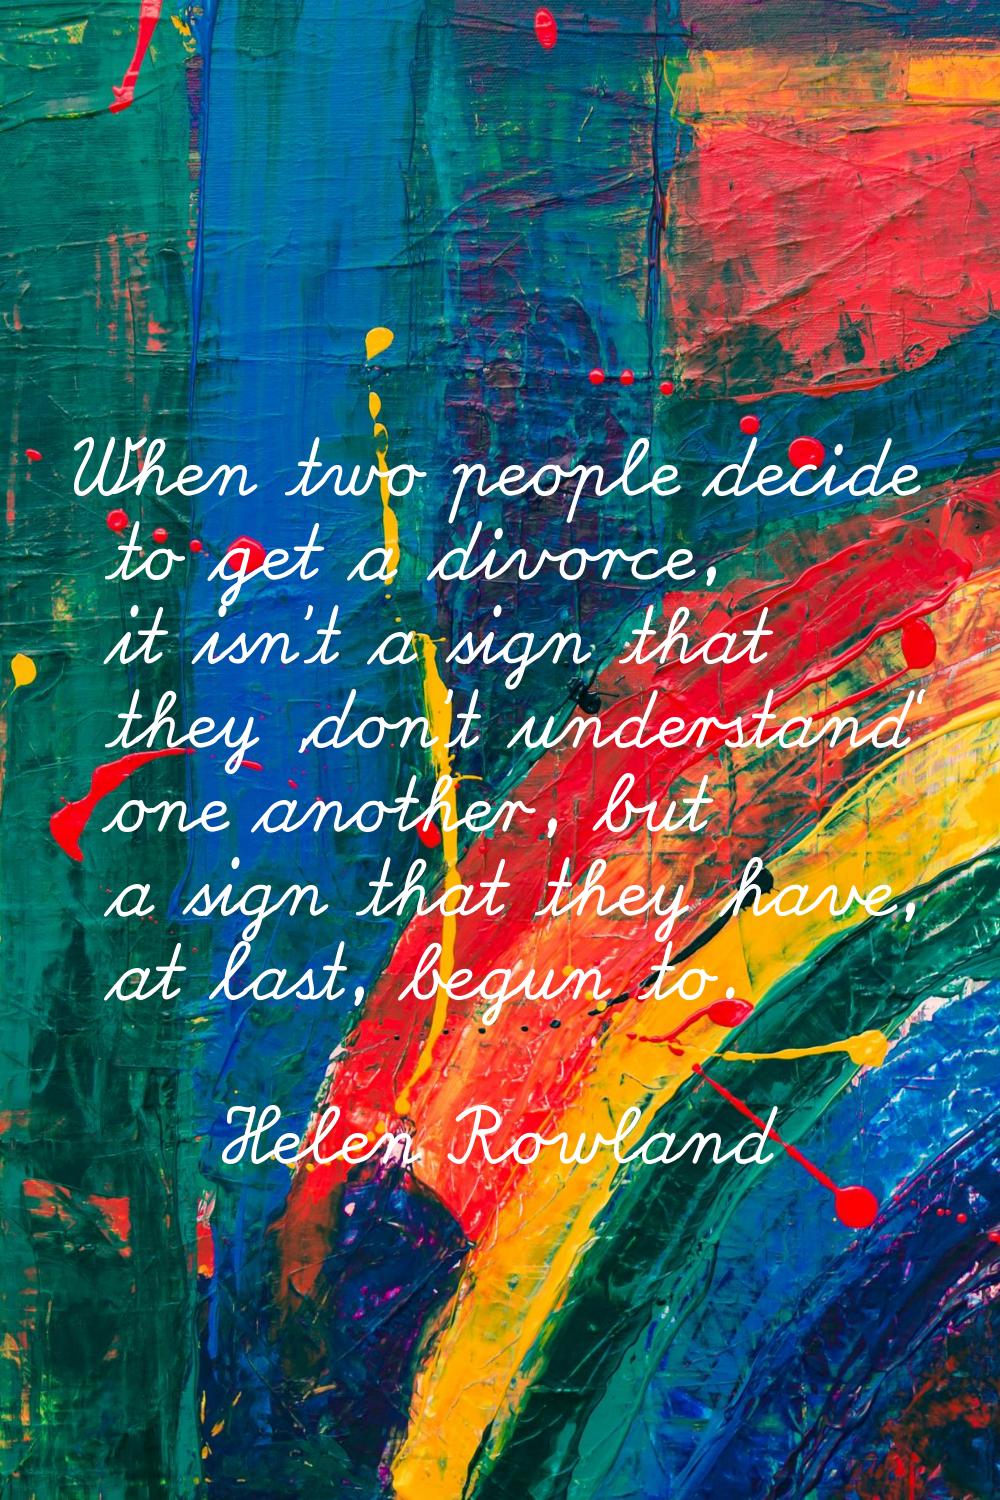 When two people decide to get a divorce, it isn't a sign that they 'don't understand' one another, 